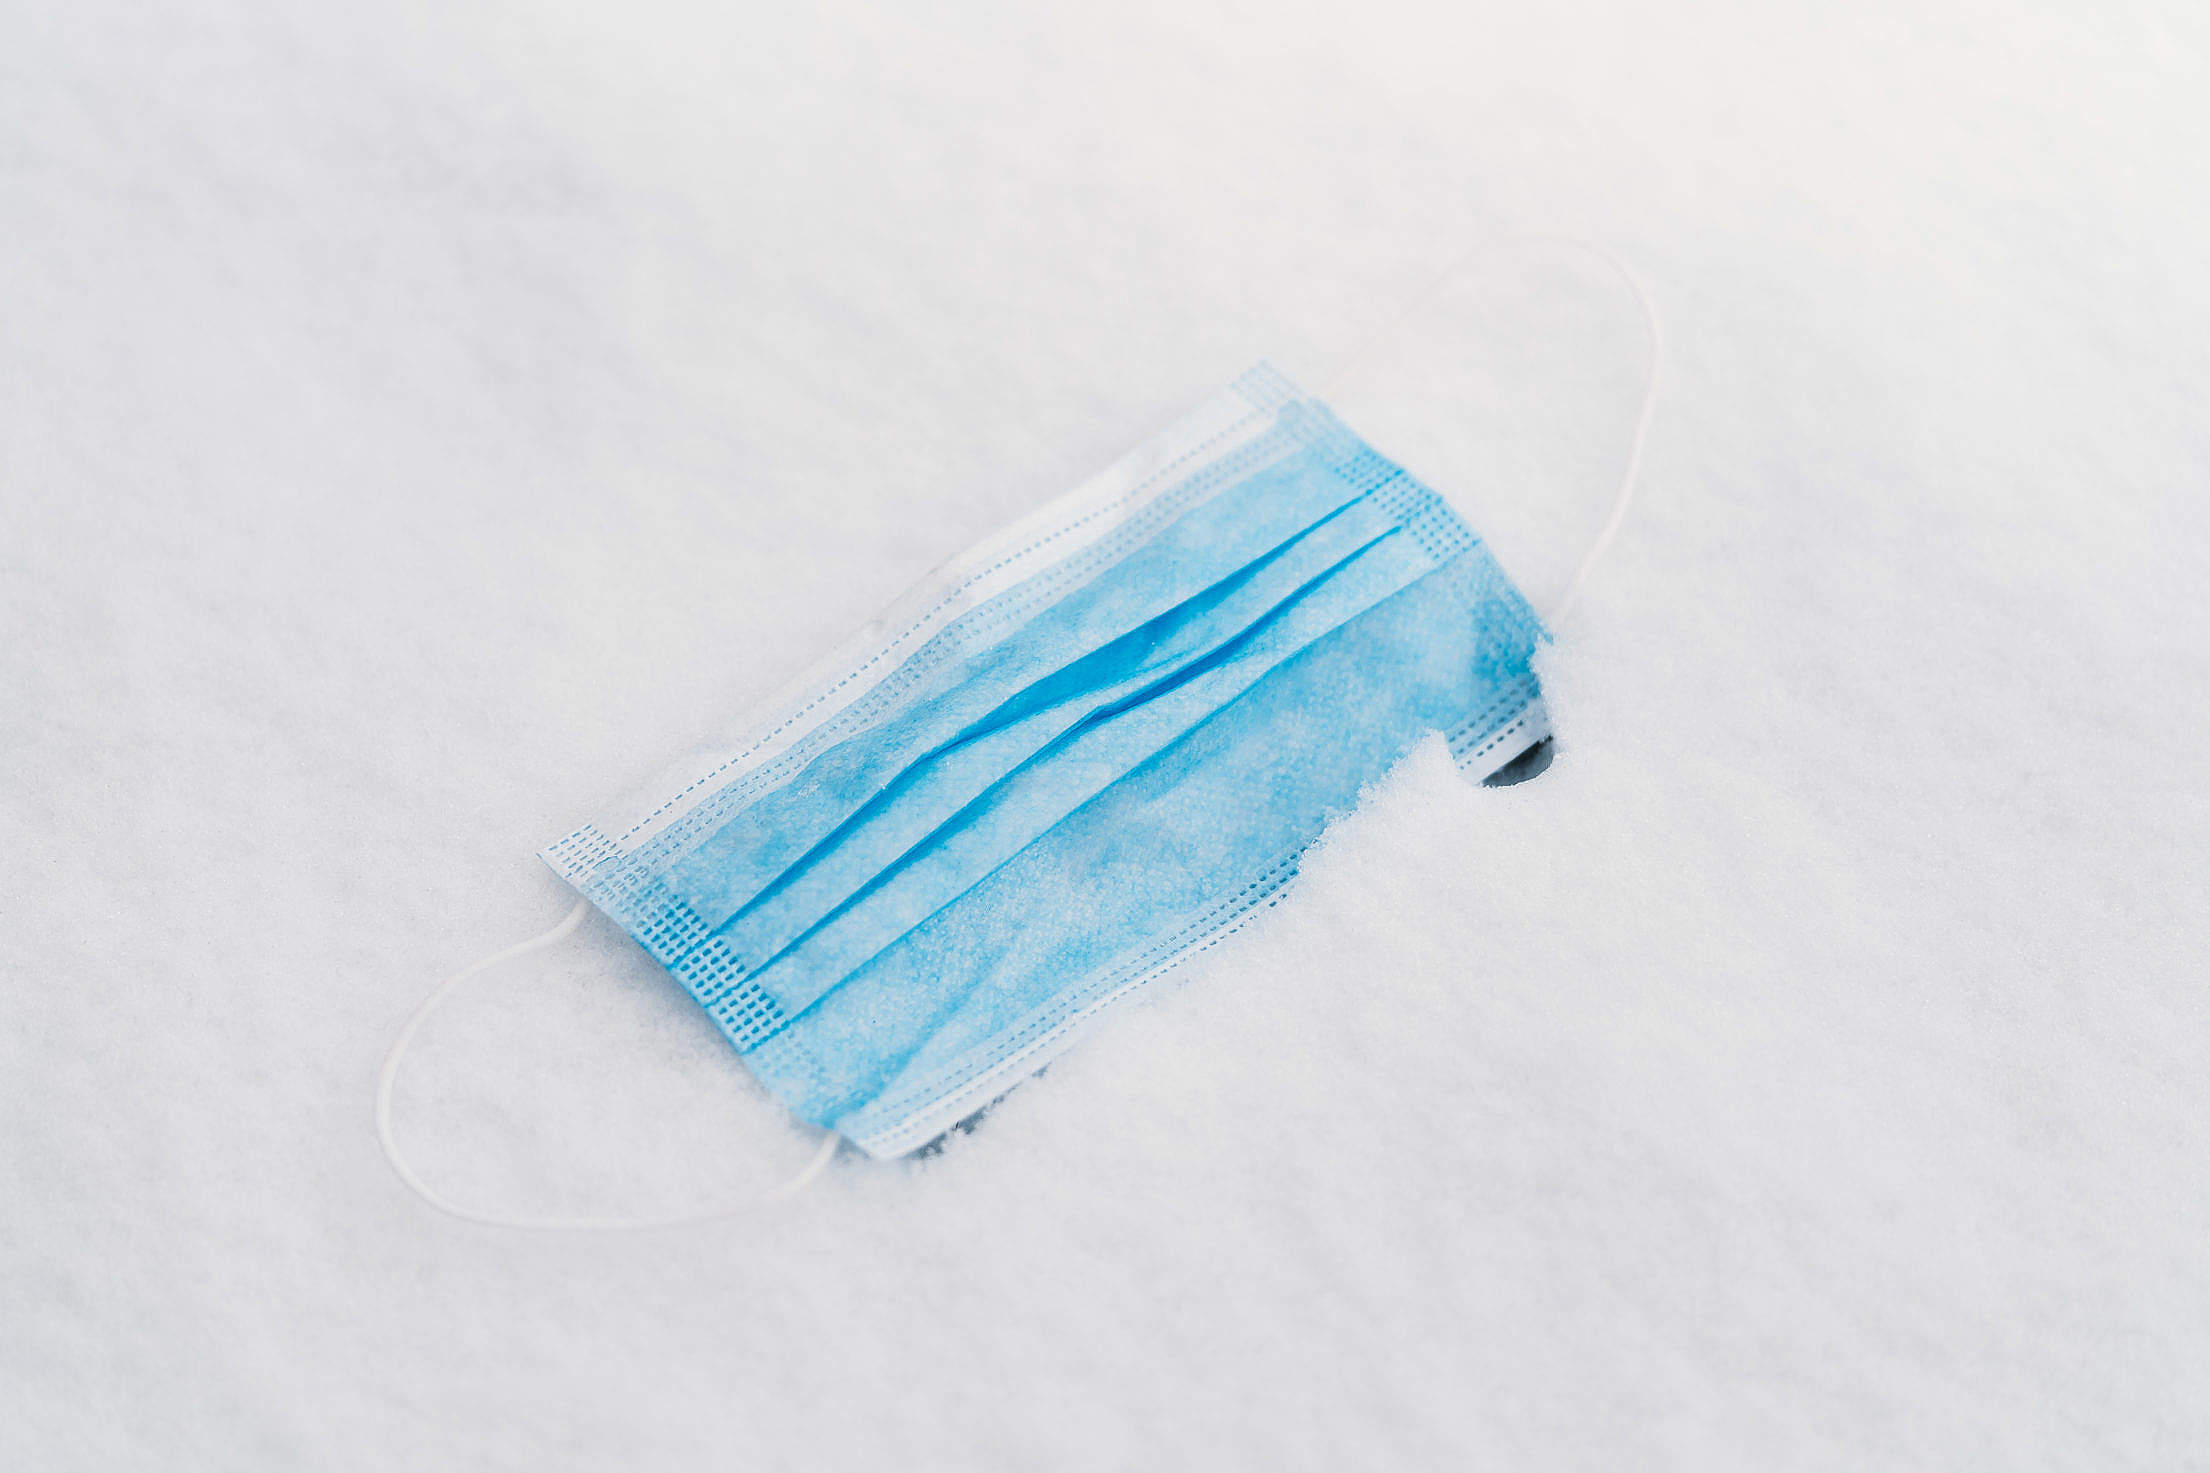 Face Mask Thrown in The Snow Free Stock Photo